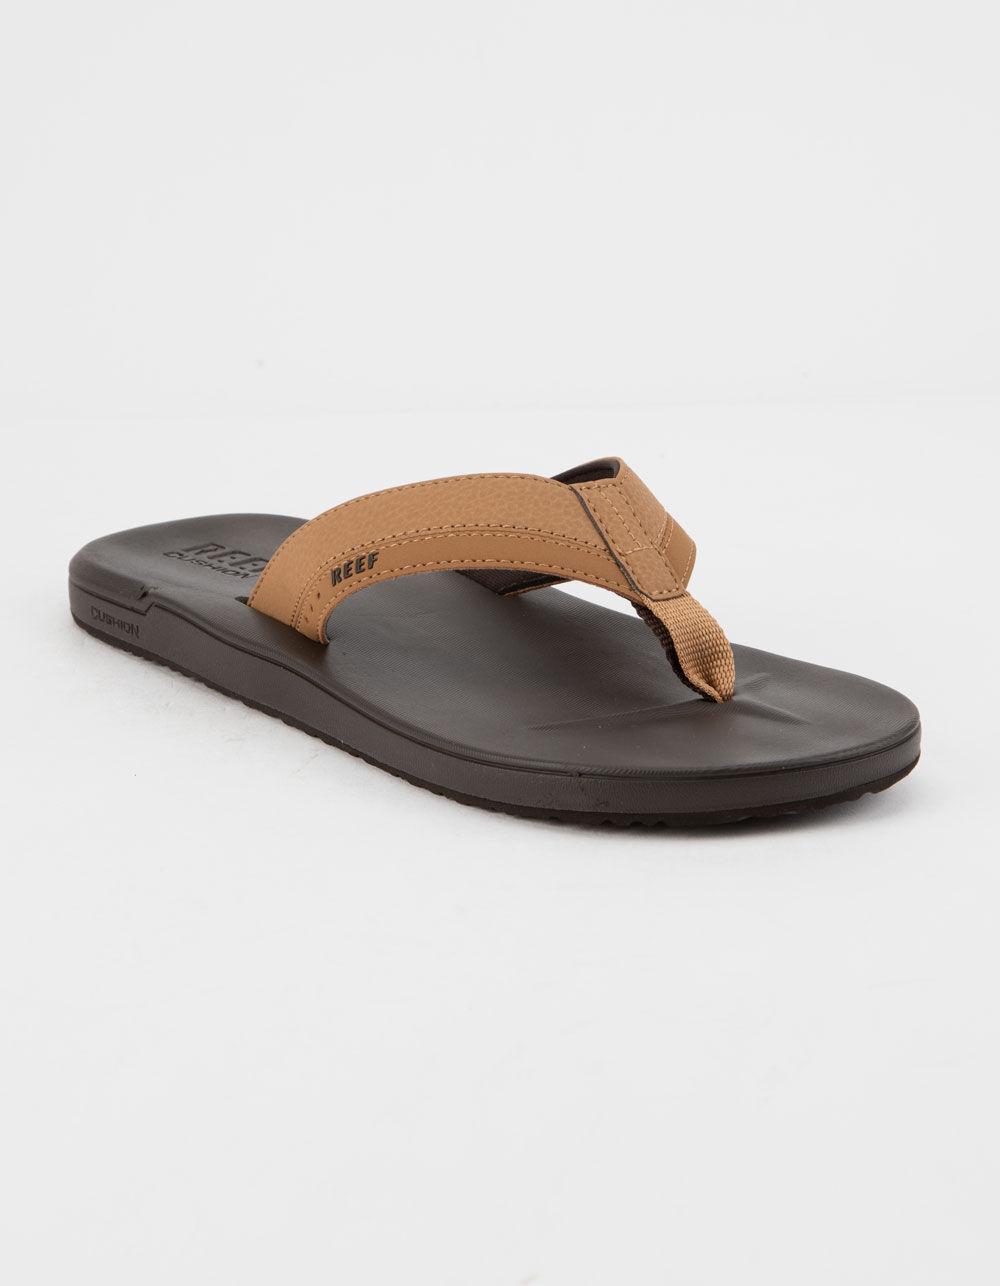 Reef Synthetic Contoured Cushion Mens Sandals in Brown for Men - Lyst